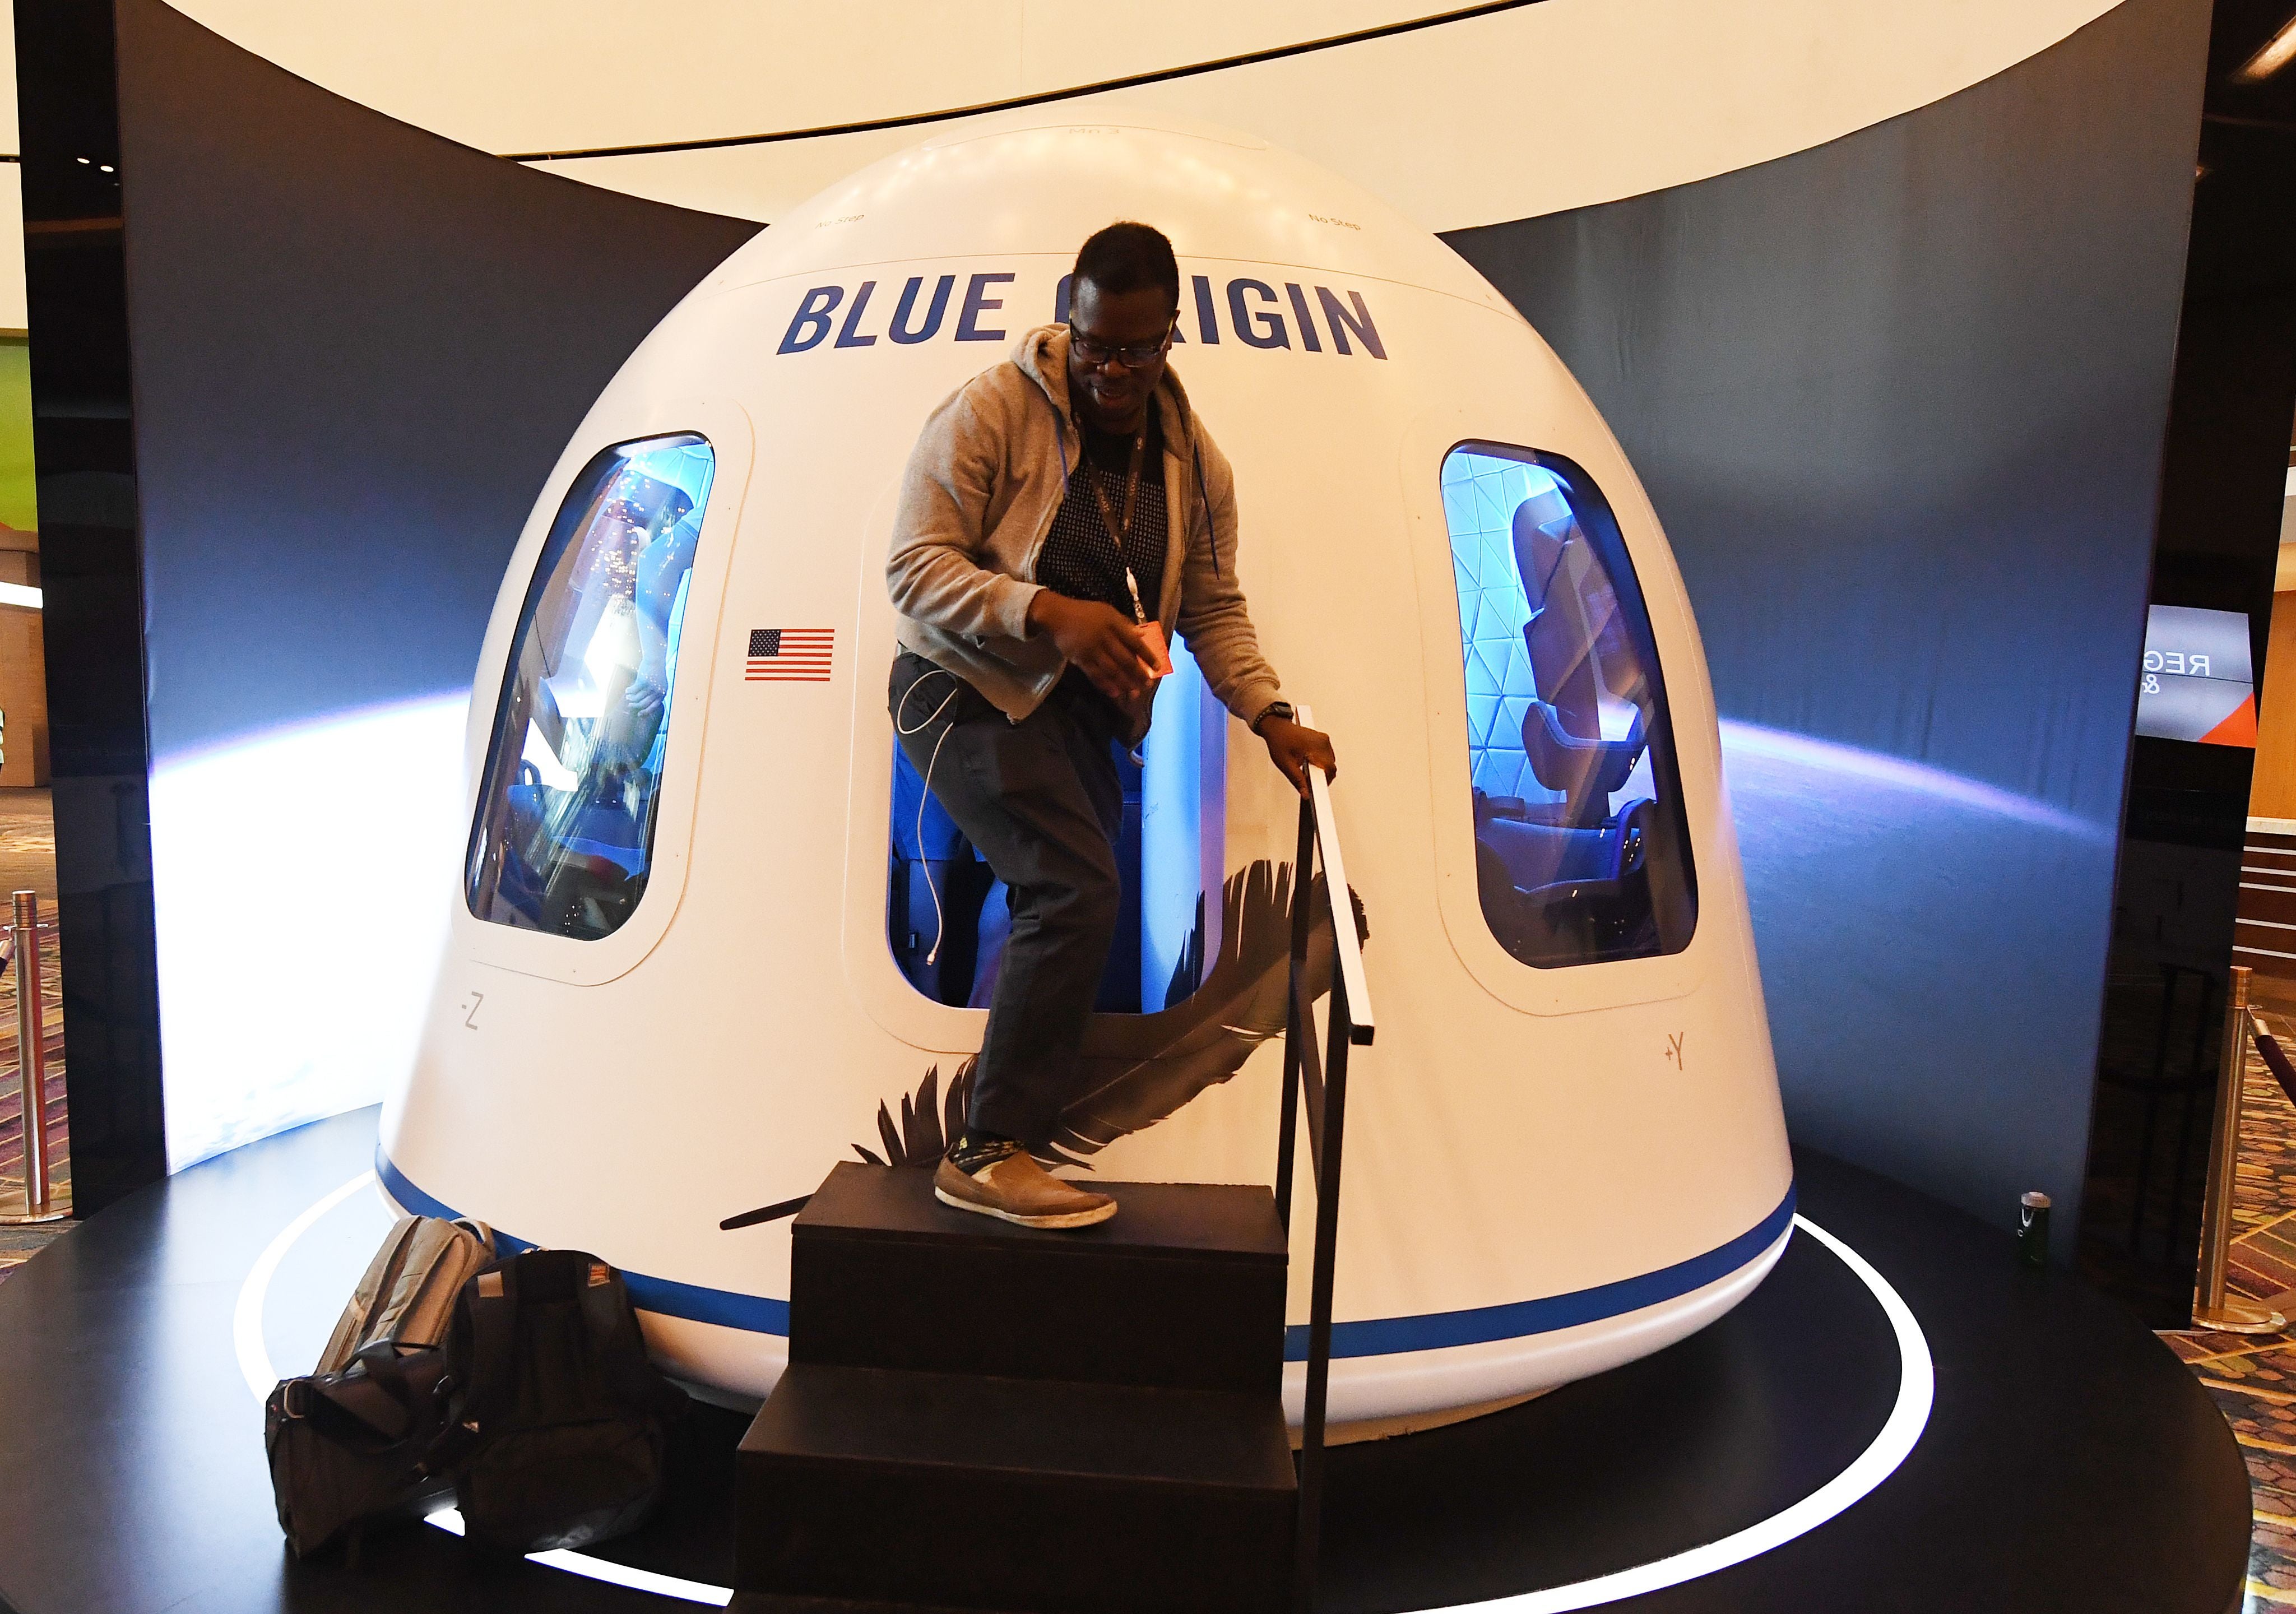 Participants leave the Blue Origin Space Simulator during the Amazon Re:MARS conference on robotics and artificial intelligence at the Aria Hotel in Las Vegas